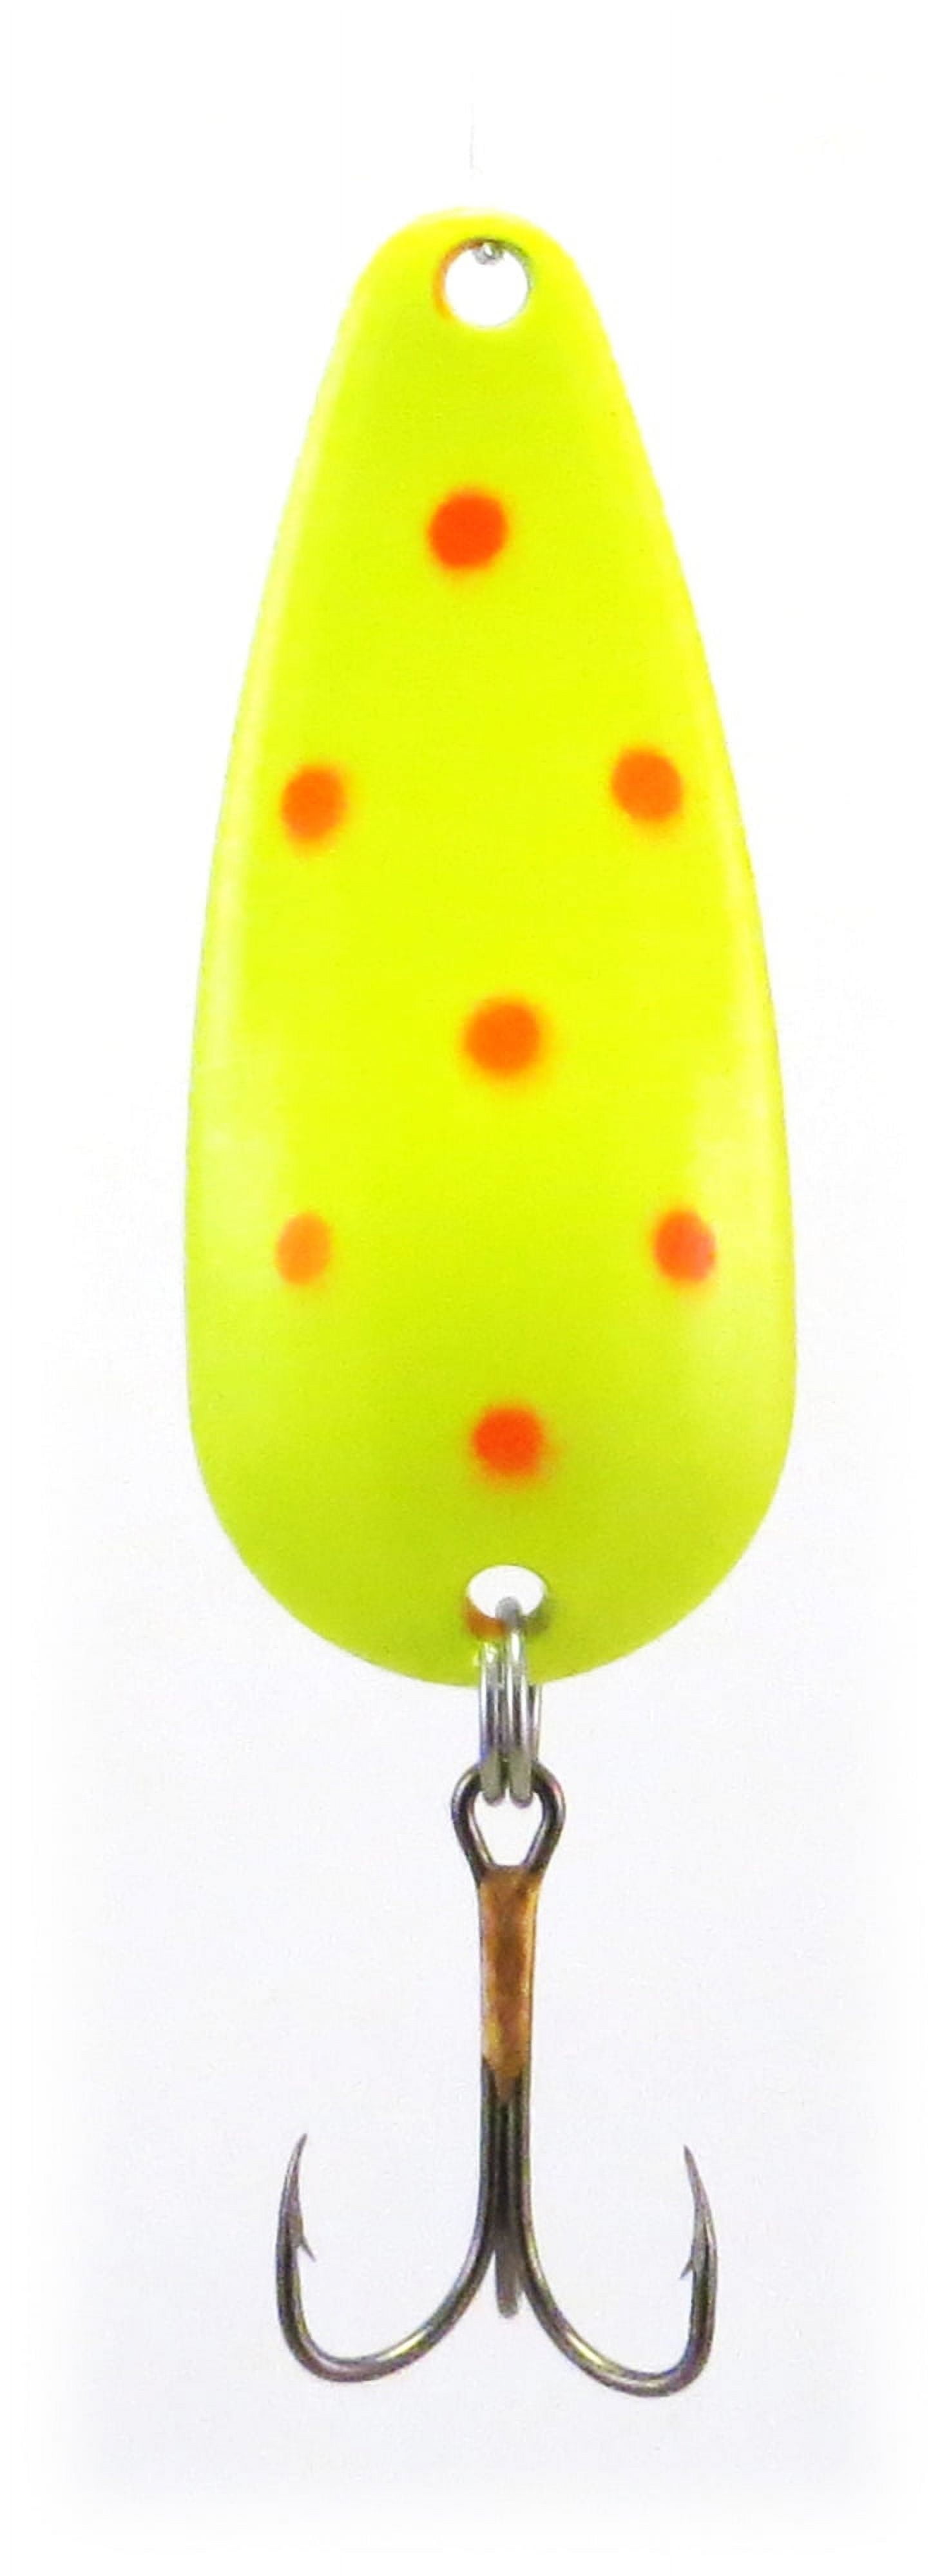 Double X Tackle Pot-o-gold Bass & Trout Spoon Fishing Lure, Hammered  Brass/Fluorescent Red Spots, 1/2 oz., Fishing Spoons 